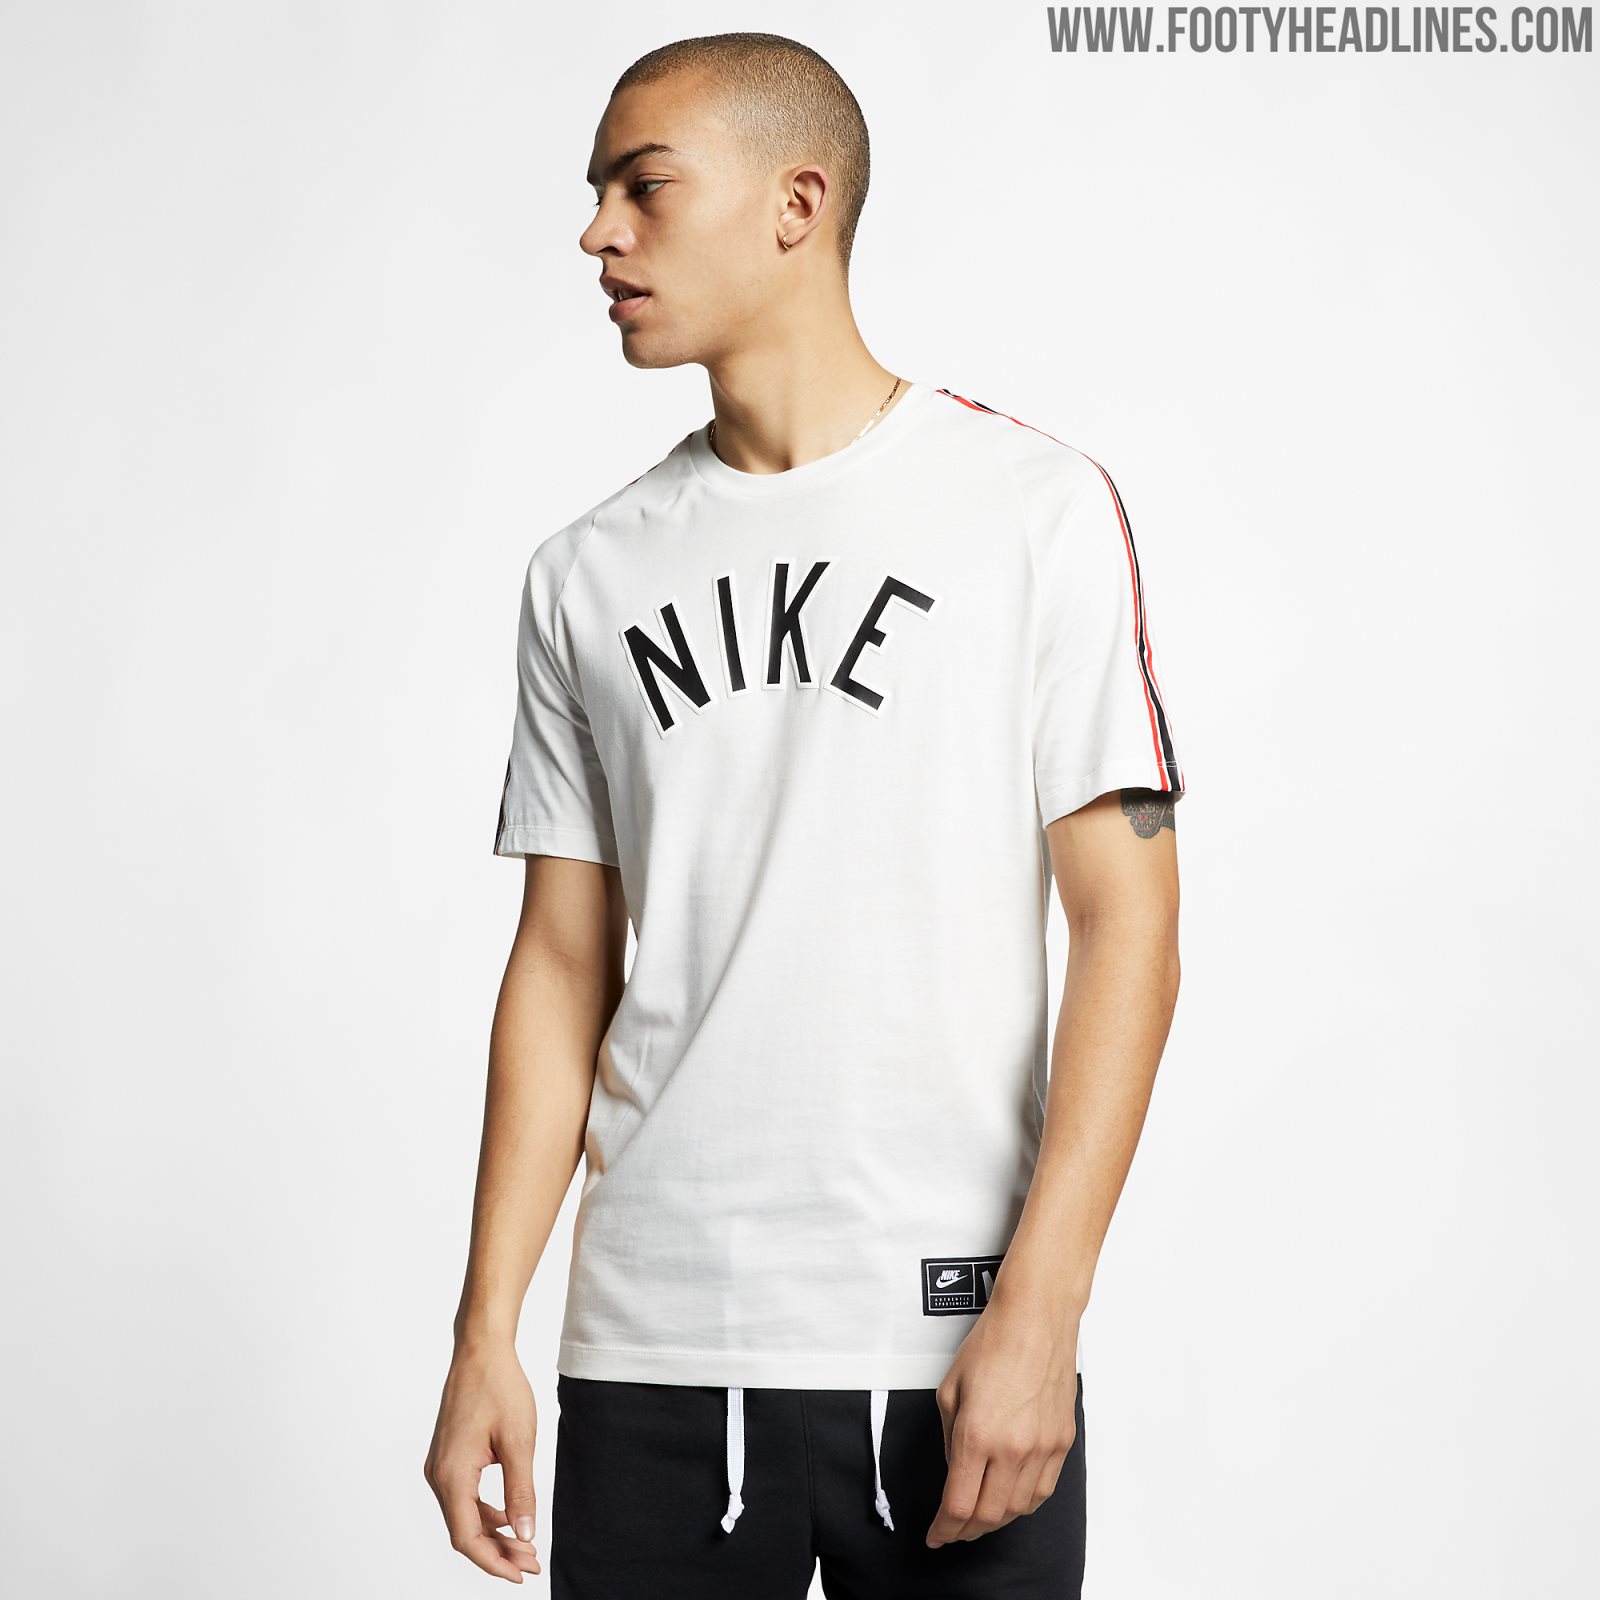 Is This Allowed? Ronaldo Wears Nike Shirt With Adidas 3 Stripes - Footy ...